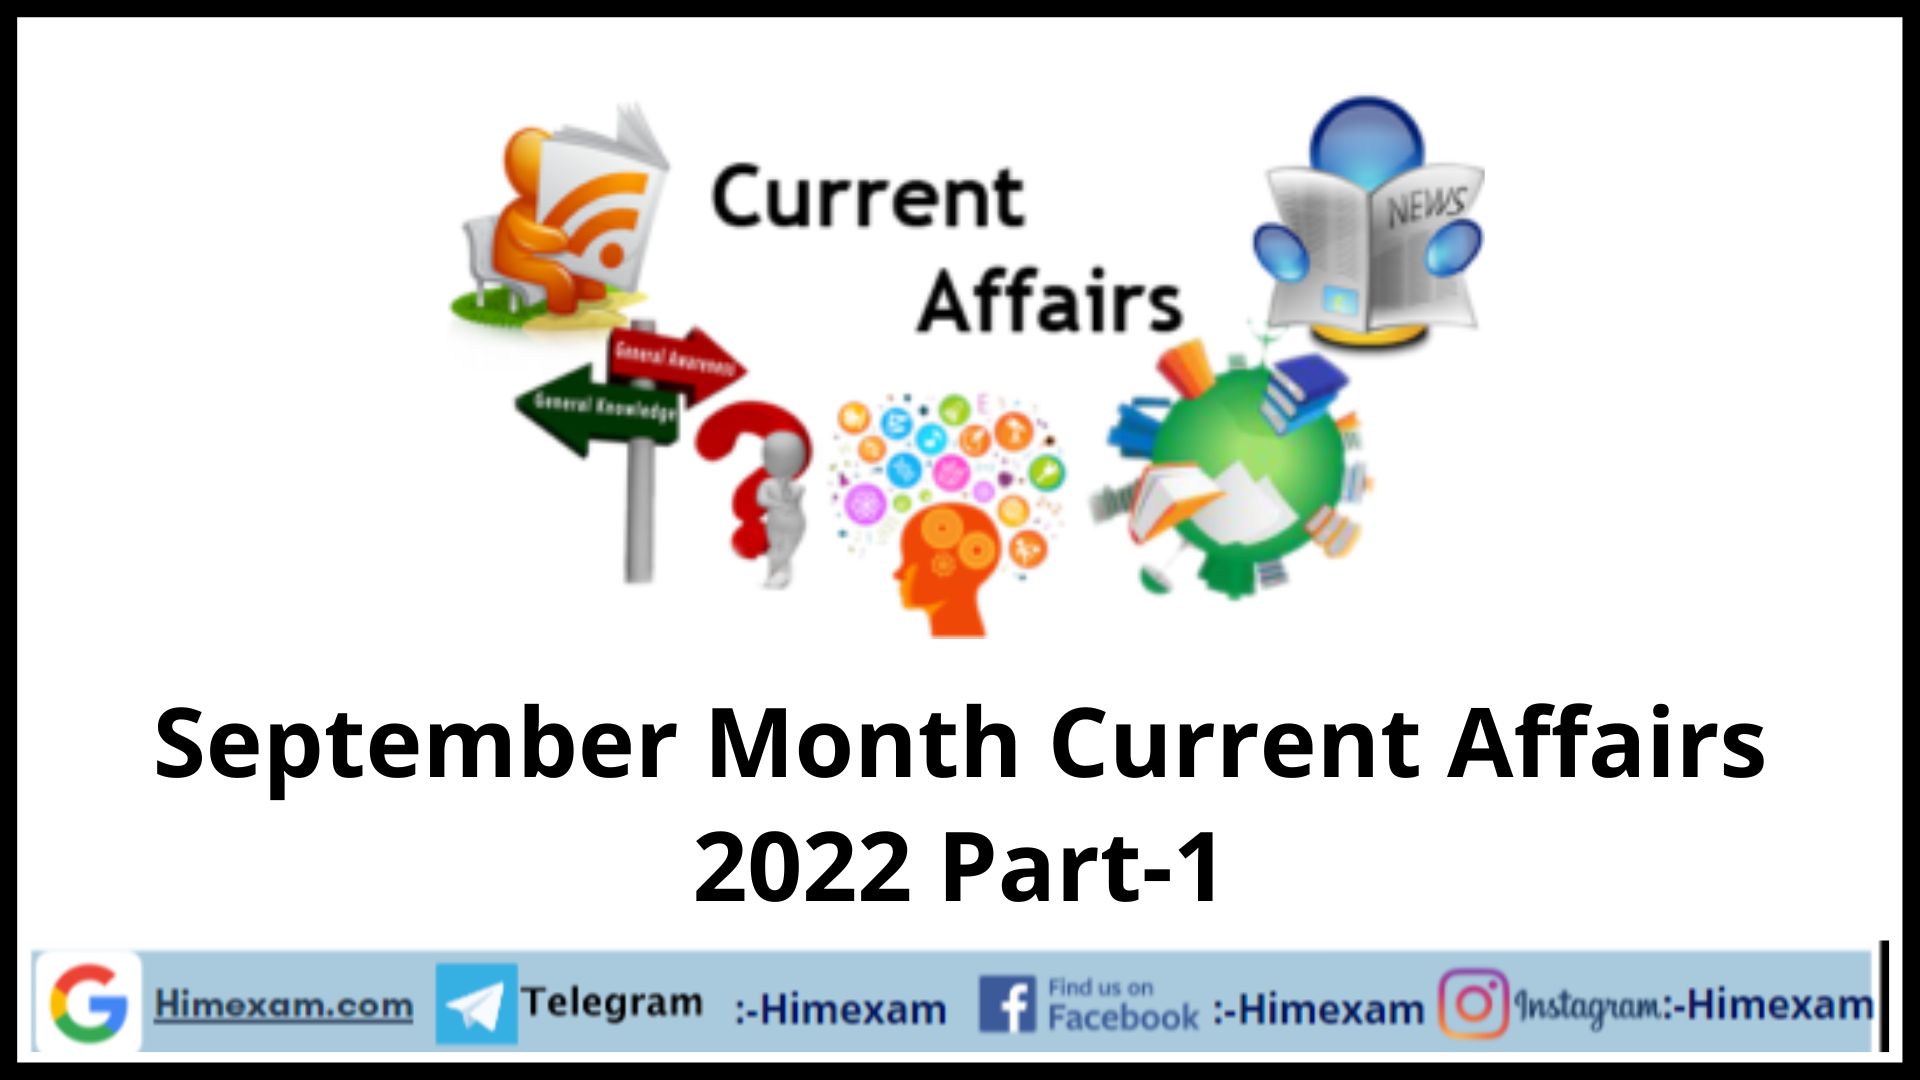 September Month Current Affairs 2022 Part-1